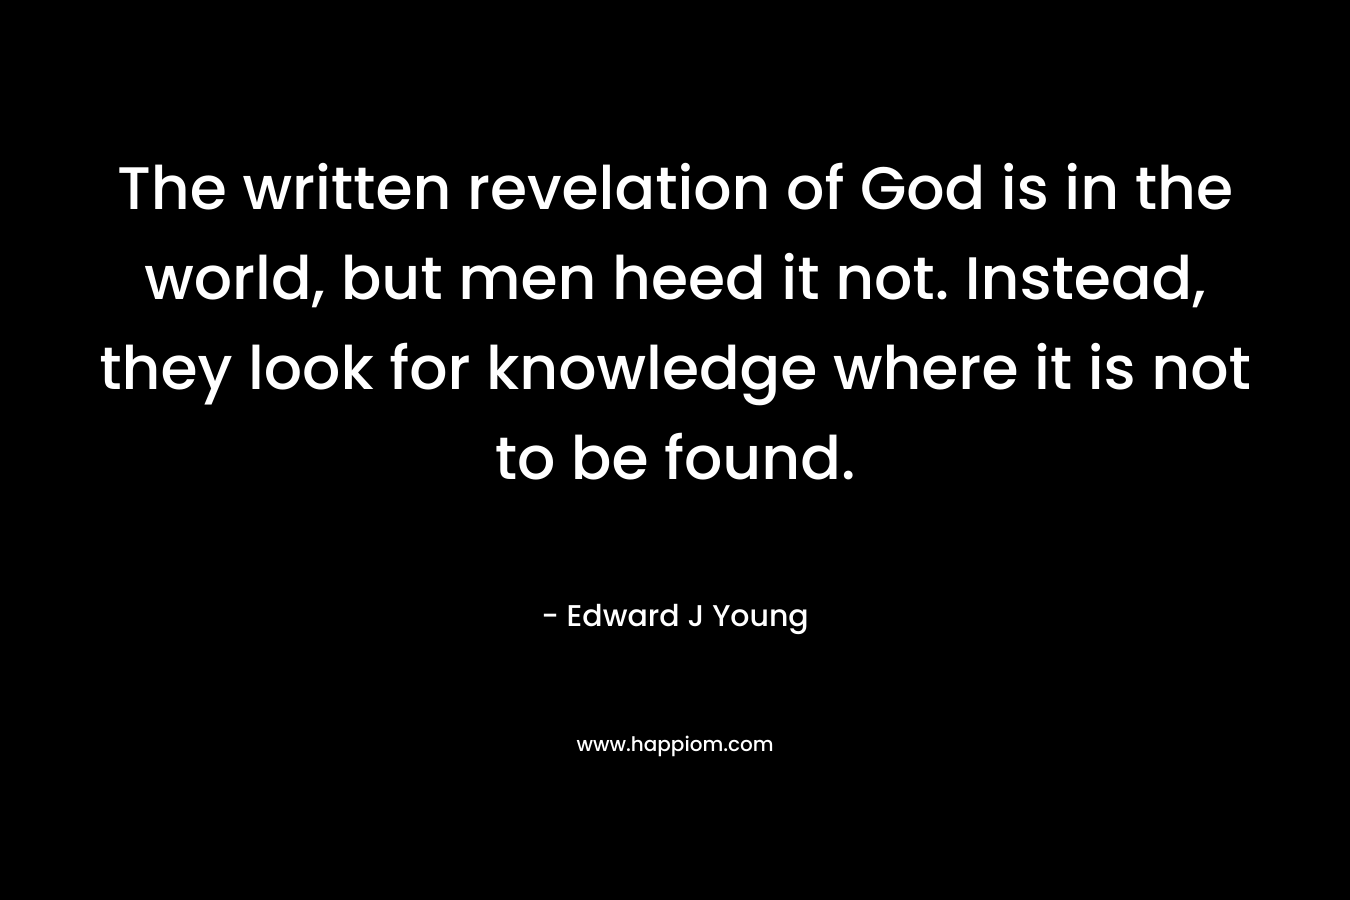 The written revelation of God is in the world, but men heed it not. Instead, they look for knowledge where it is not to be found.